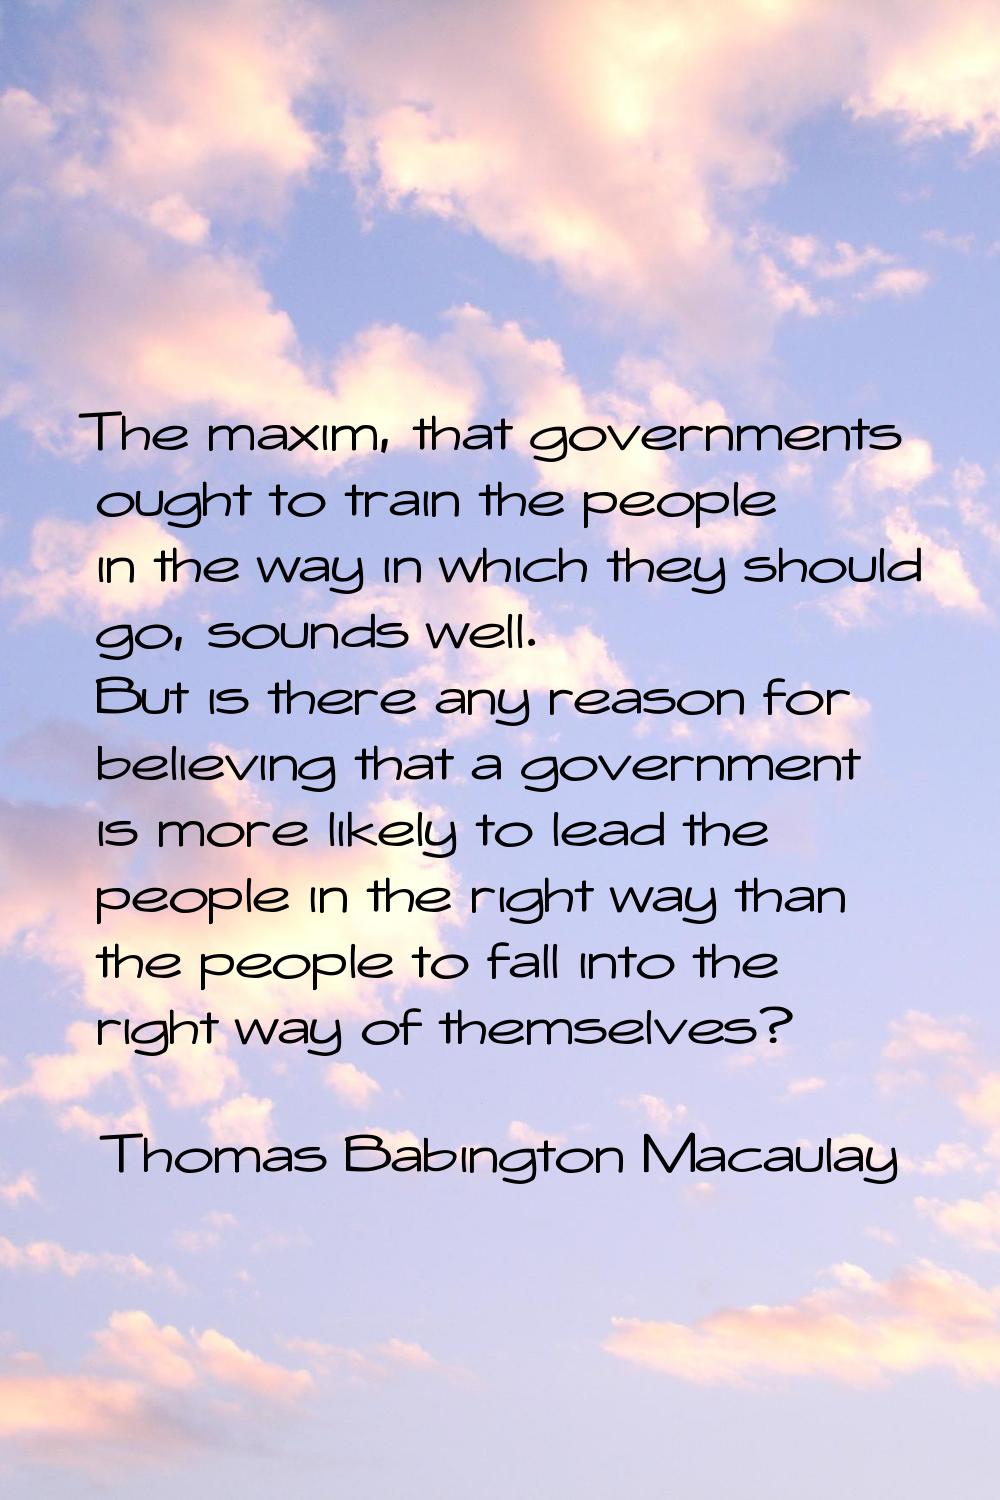 The maxim, that governments ought to train the people in the way in which they should go, sounds we